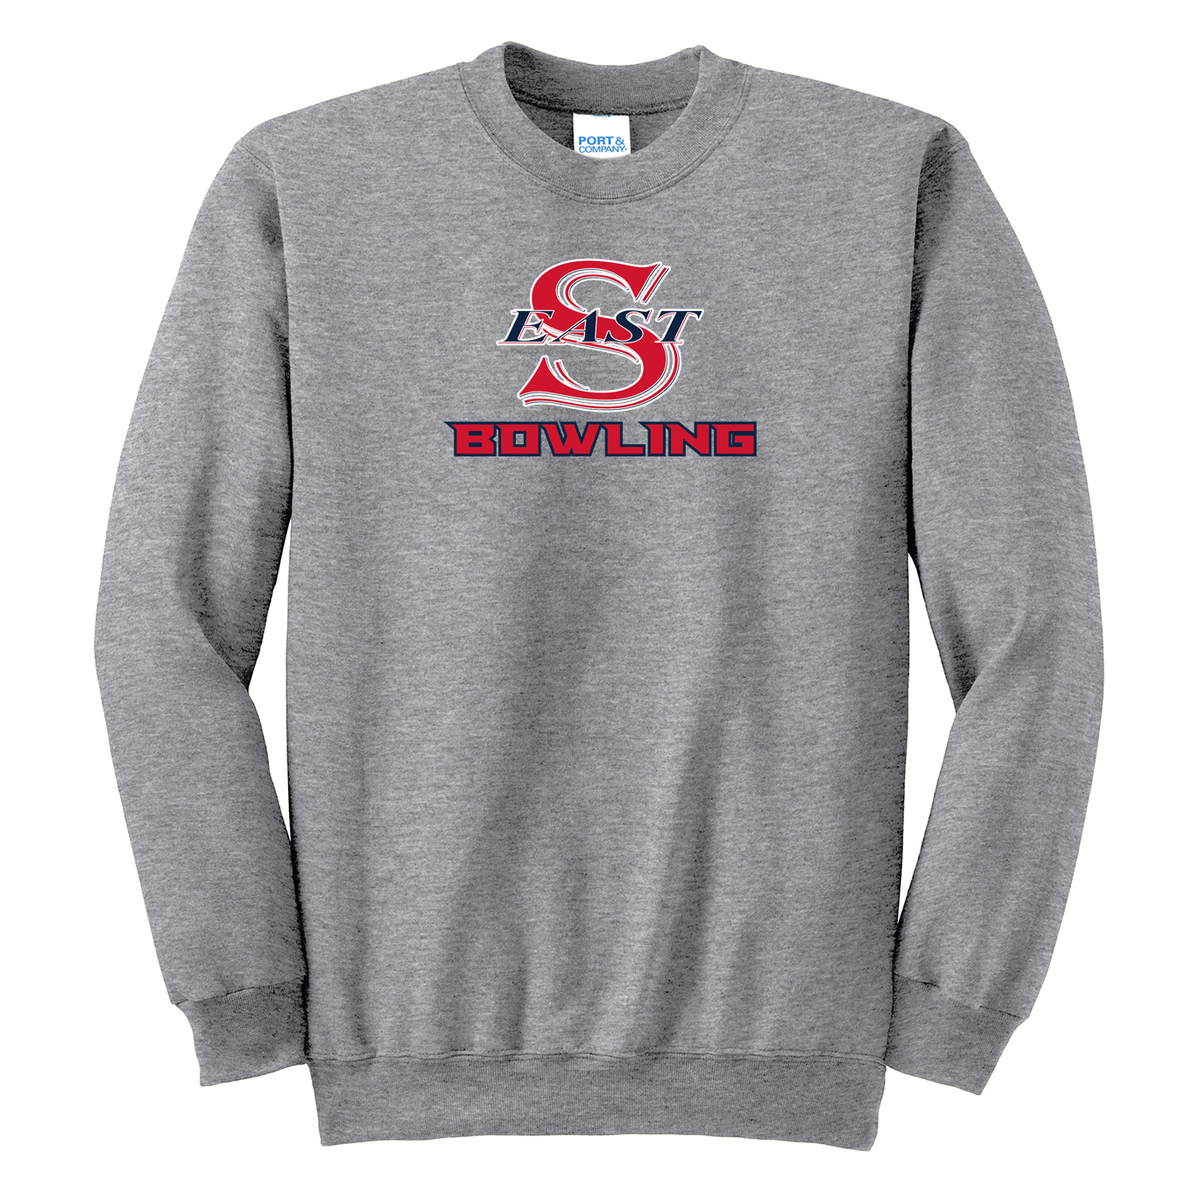 Smithtown East Bowling Crew Neck Sweater